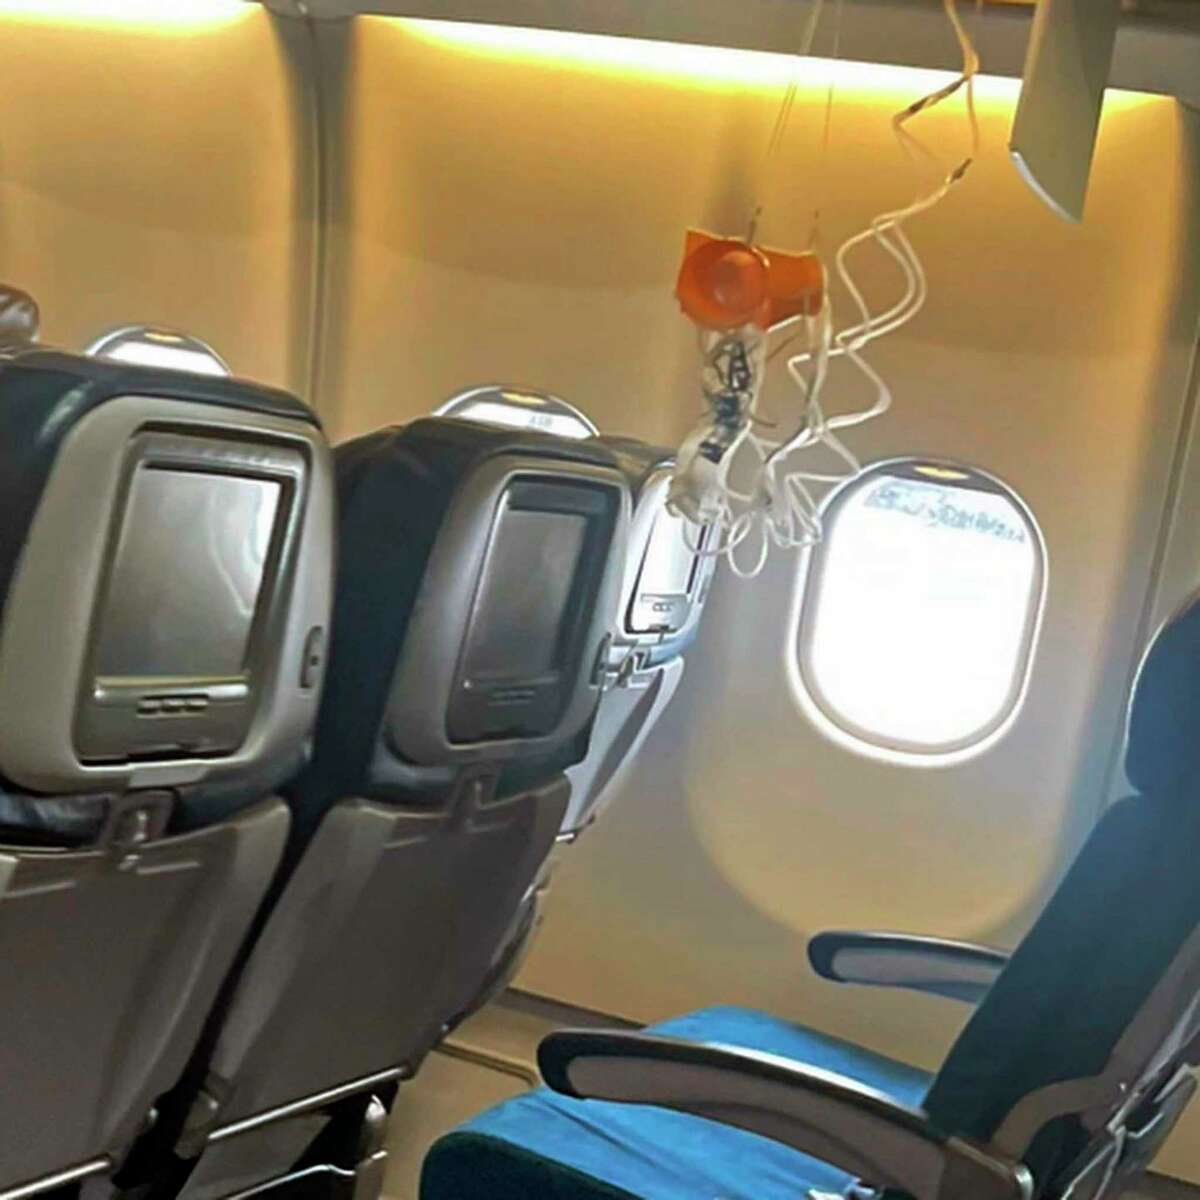 This photo taken by a passenger shows the interior of a Hawaiian Airlines jet on its flight from Phoenix to Honolulu on Sunday after severe turbulence rocked the flight.